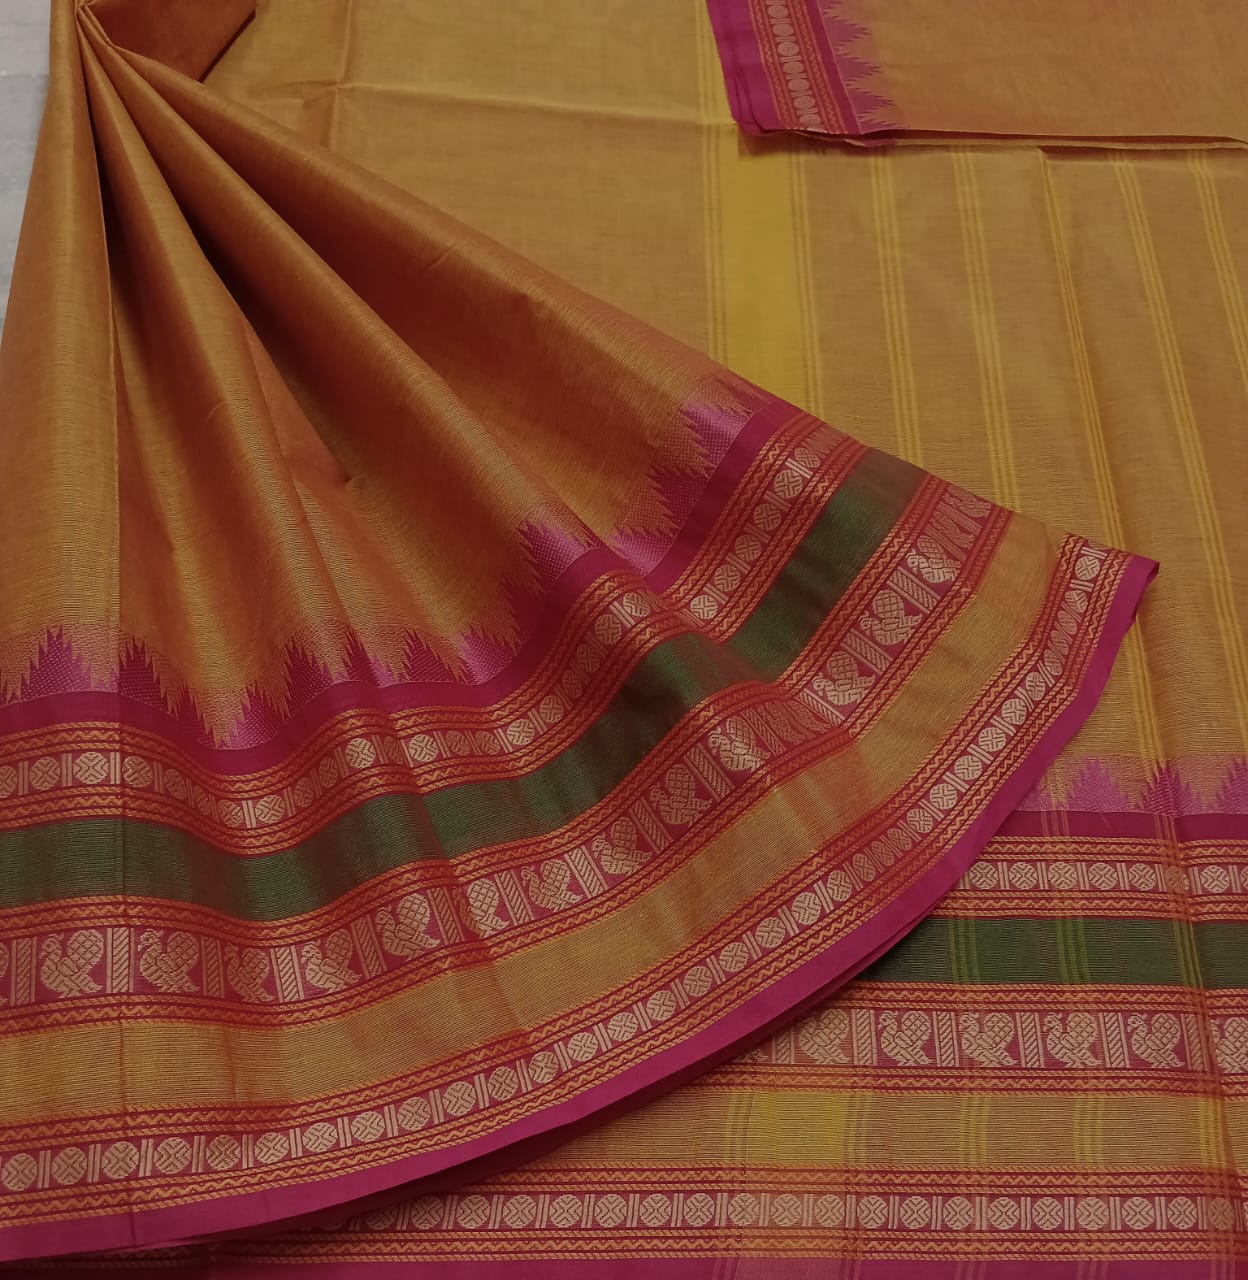 Buy Handloom Saga Pure Cotton Ikkat Saree having Small Flower Butti all  over the Body in Green With Yellow Border Combination of 5.5mtrs for Women  by ODISHA HANDLOOM at Amazon.in